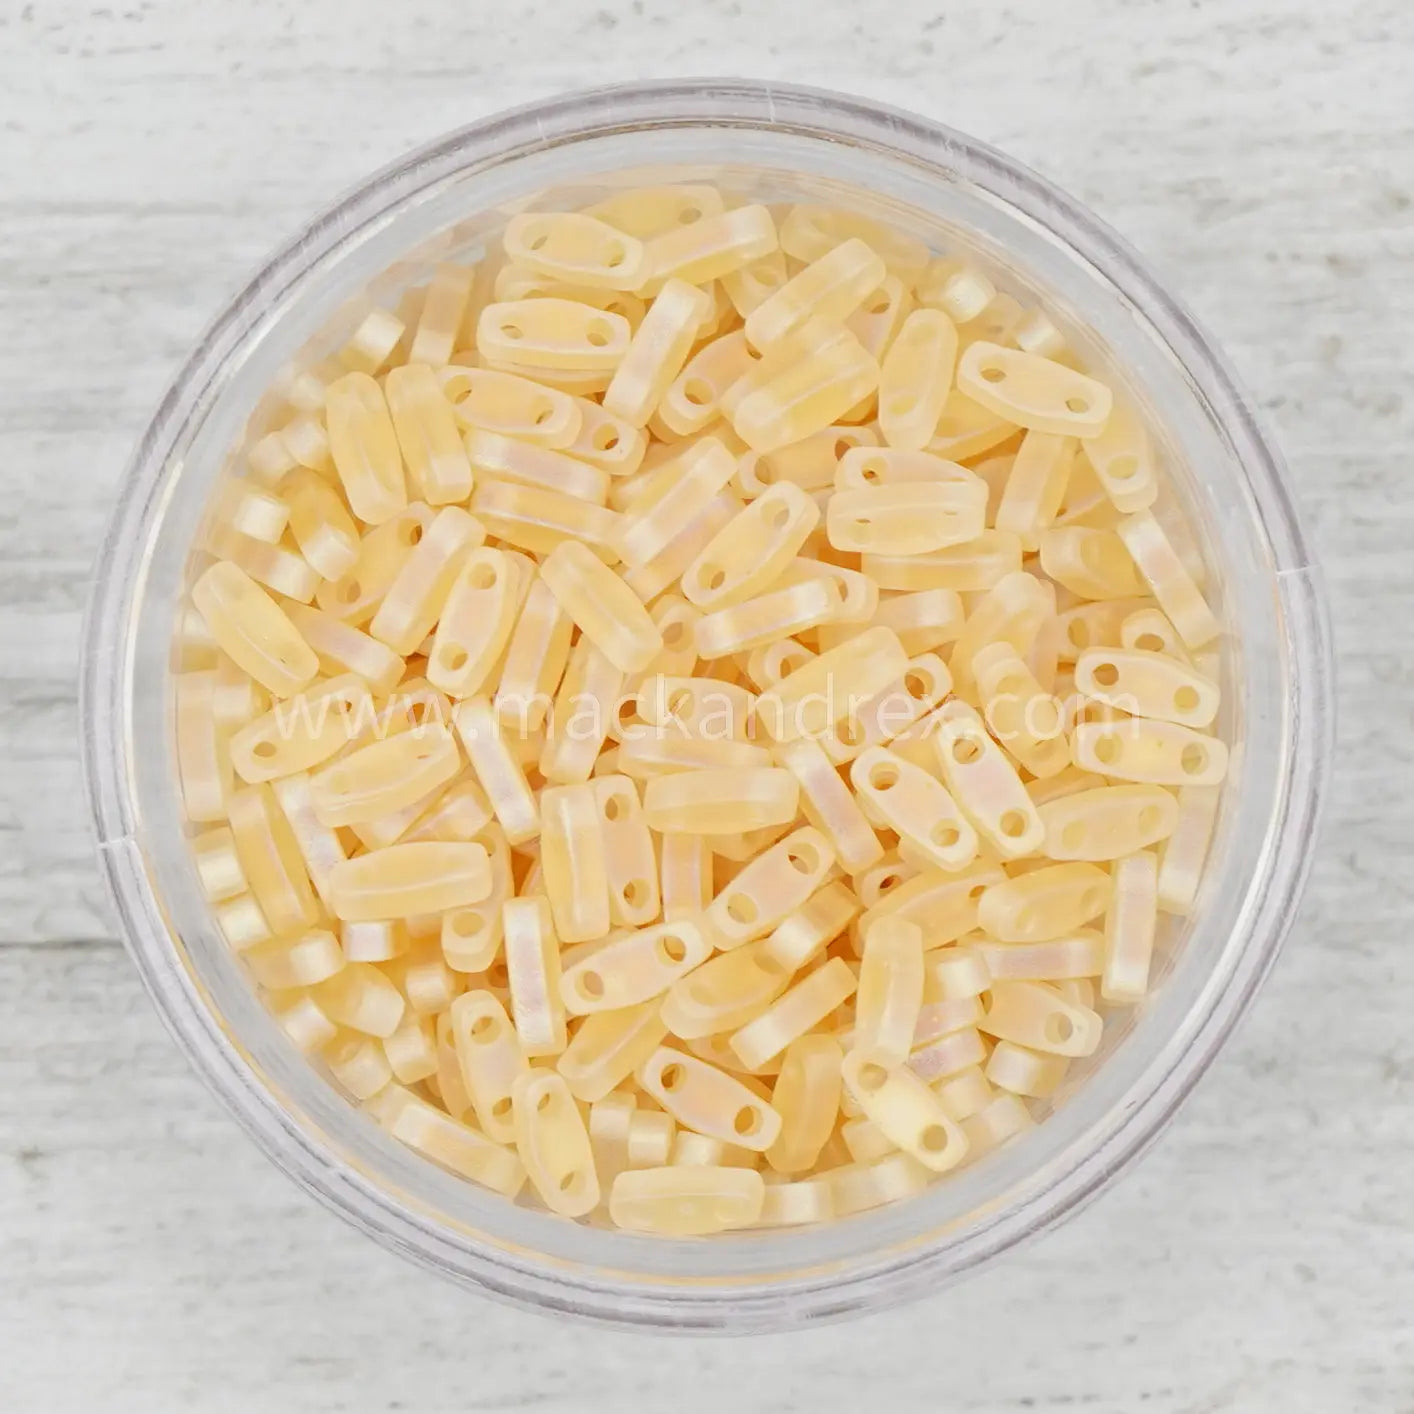 a bowl filled with lots of yellow pasta